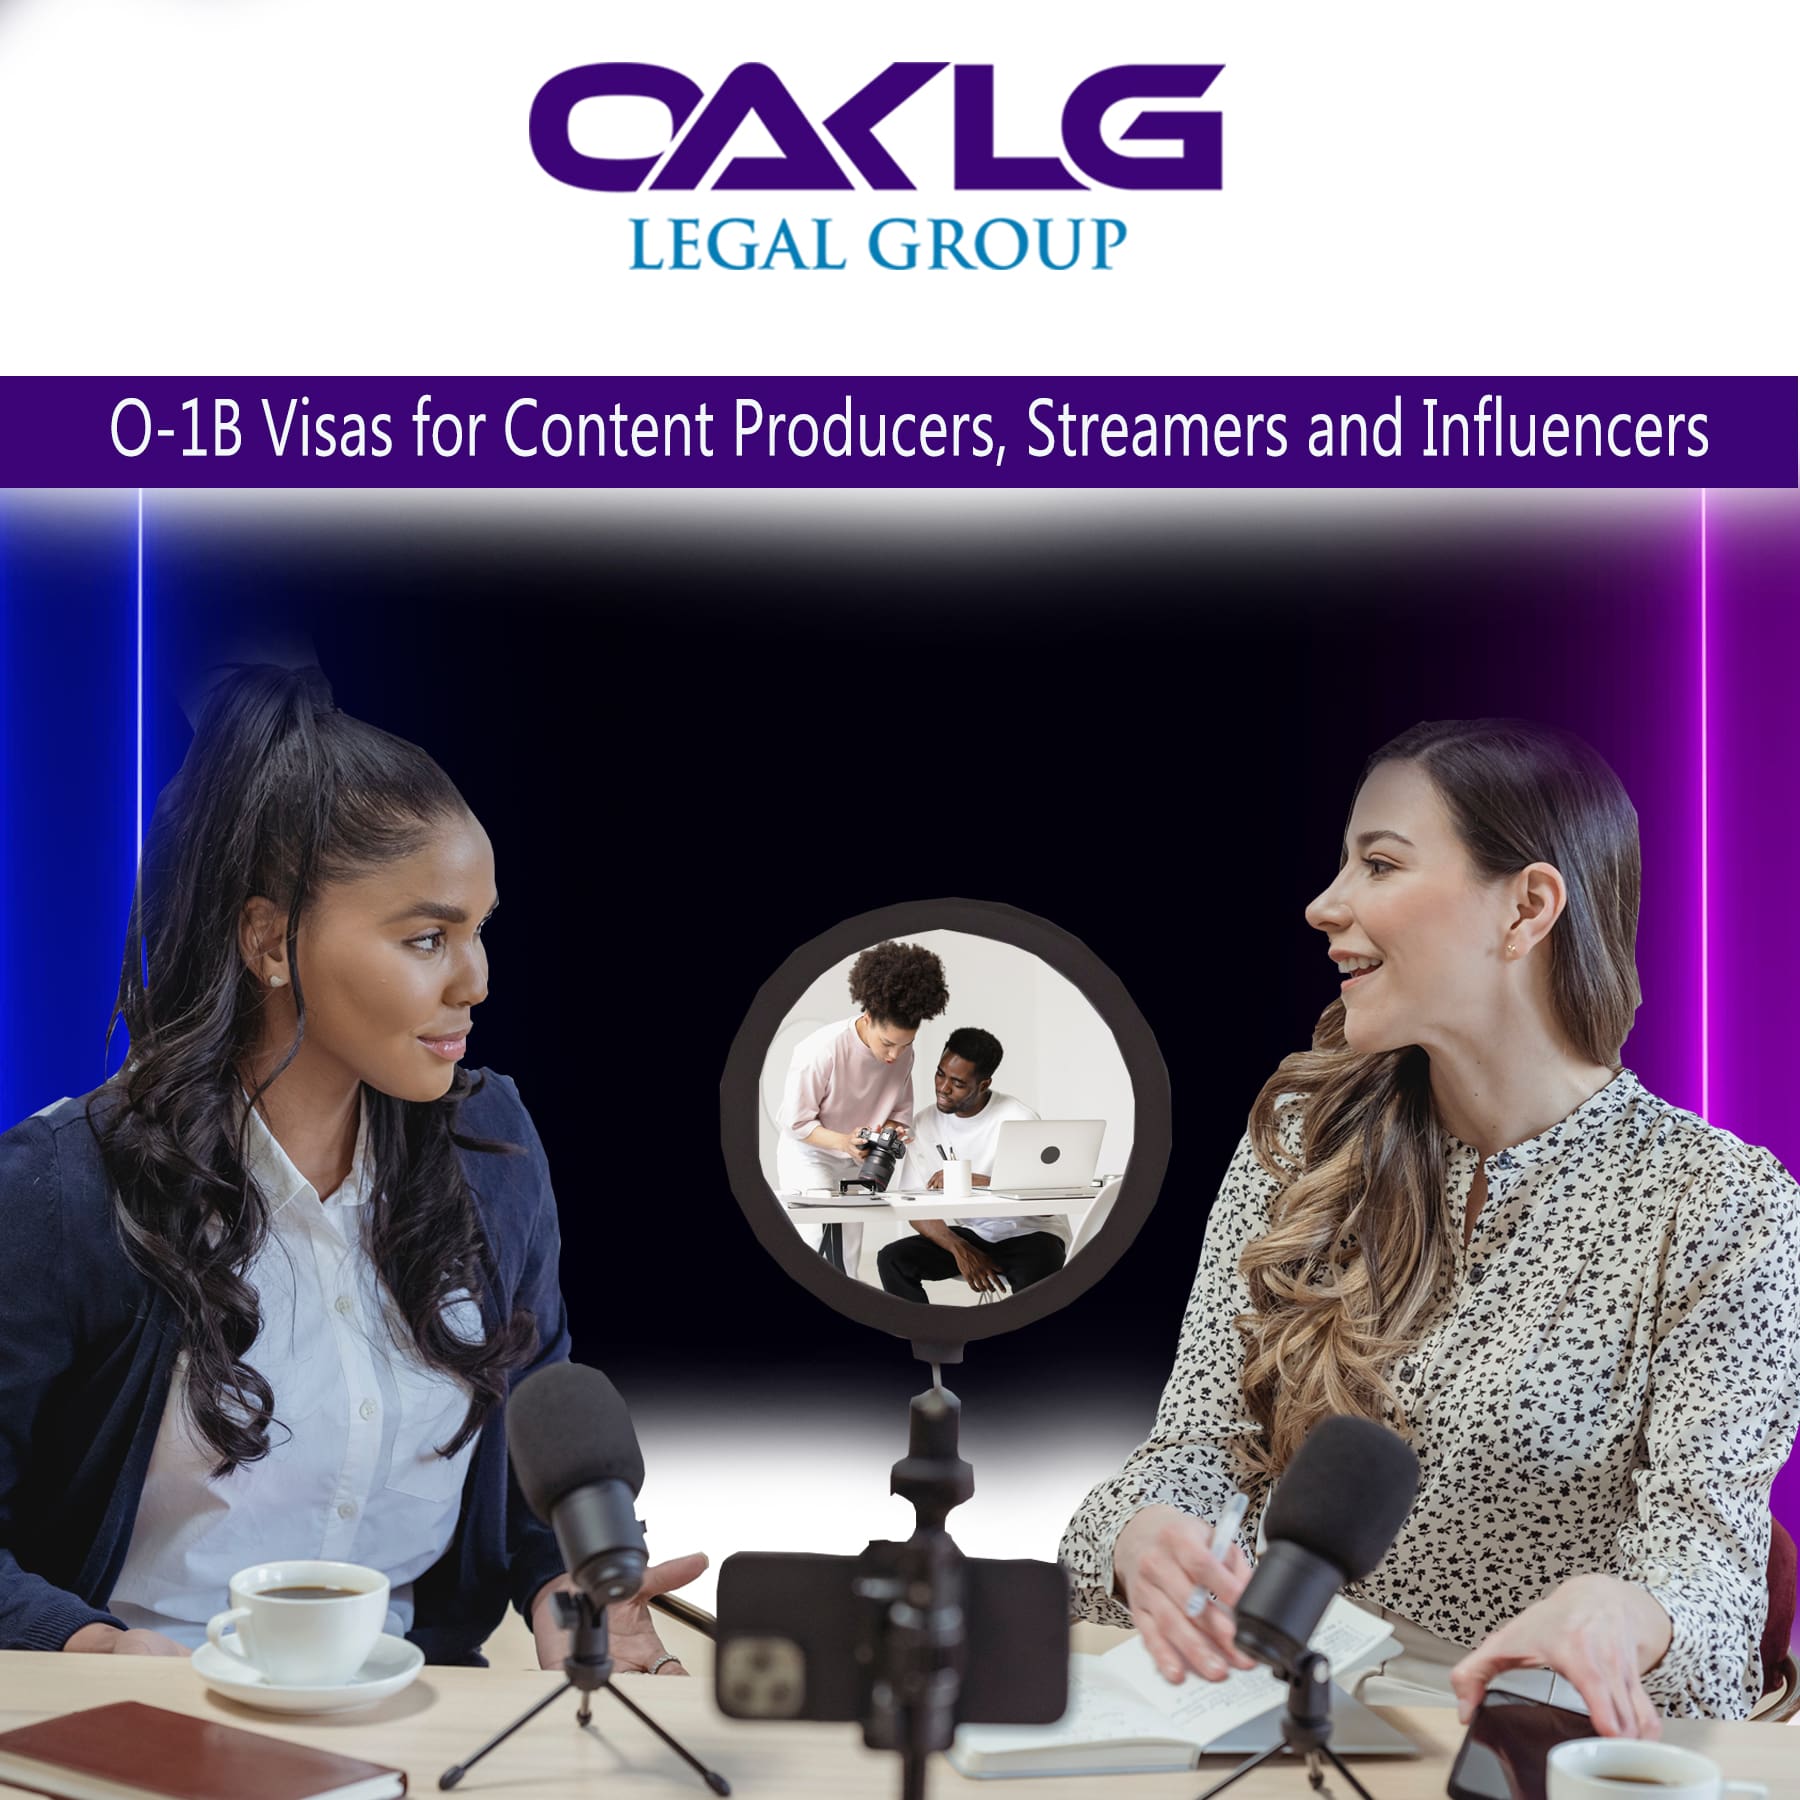 O-1B Visas for Content Producers, Streamers and Influencers